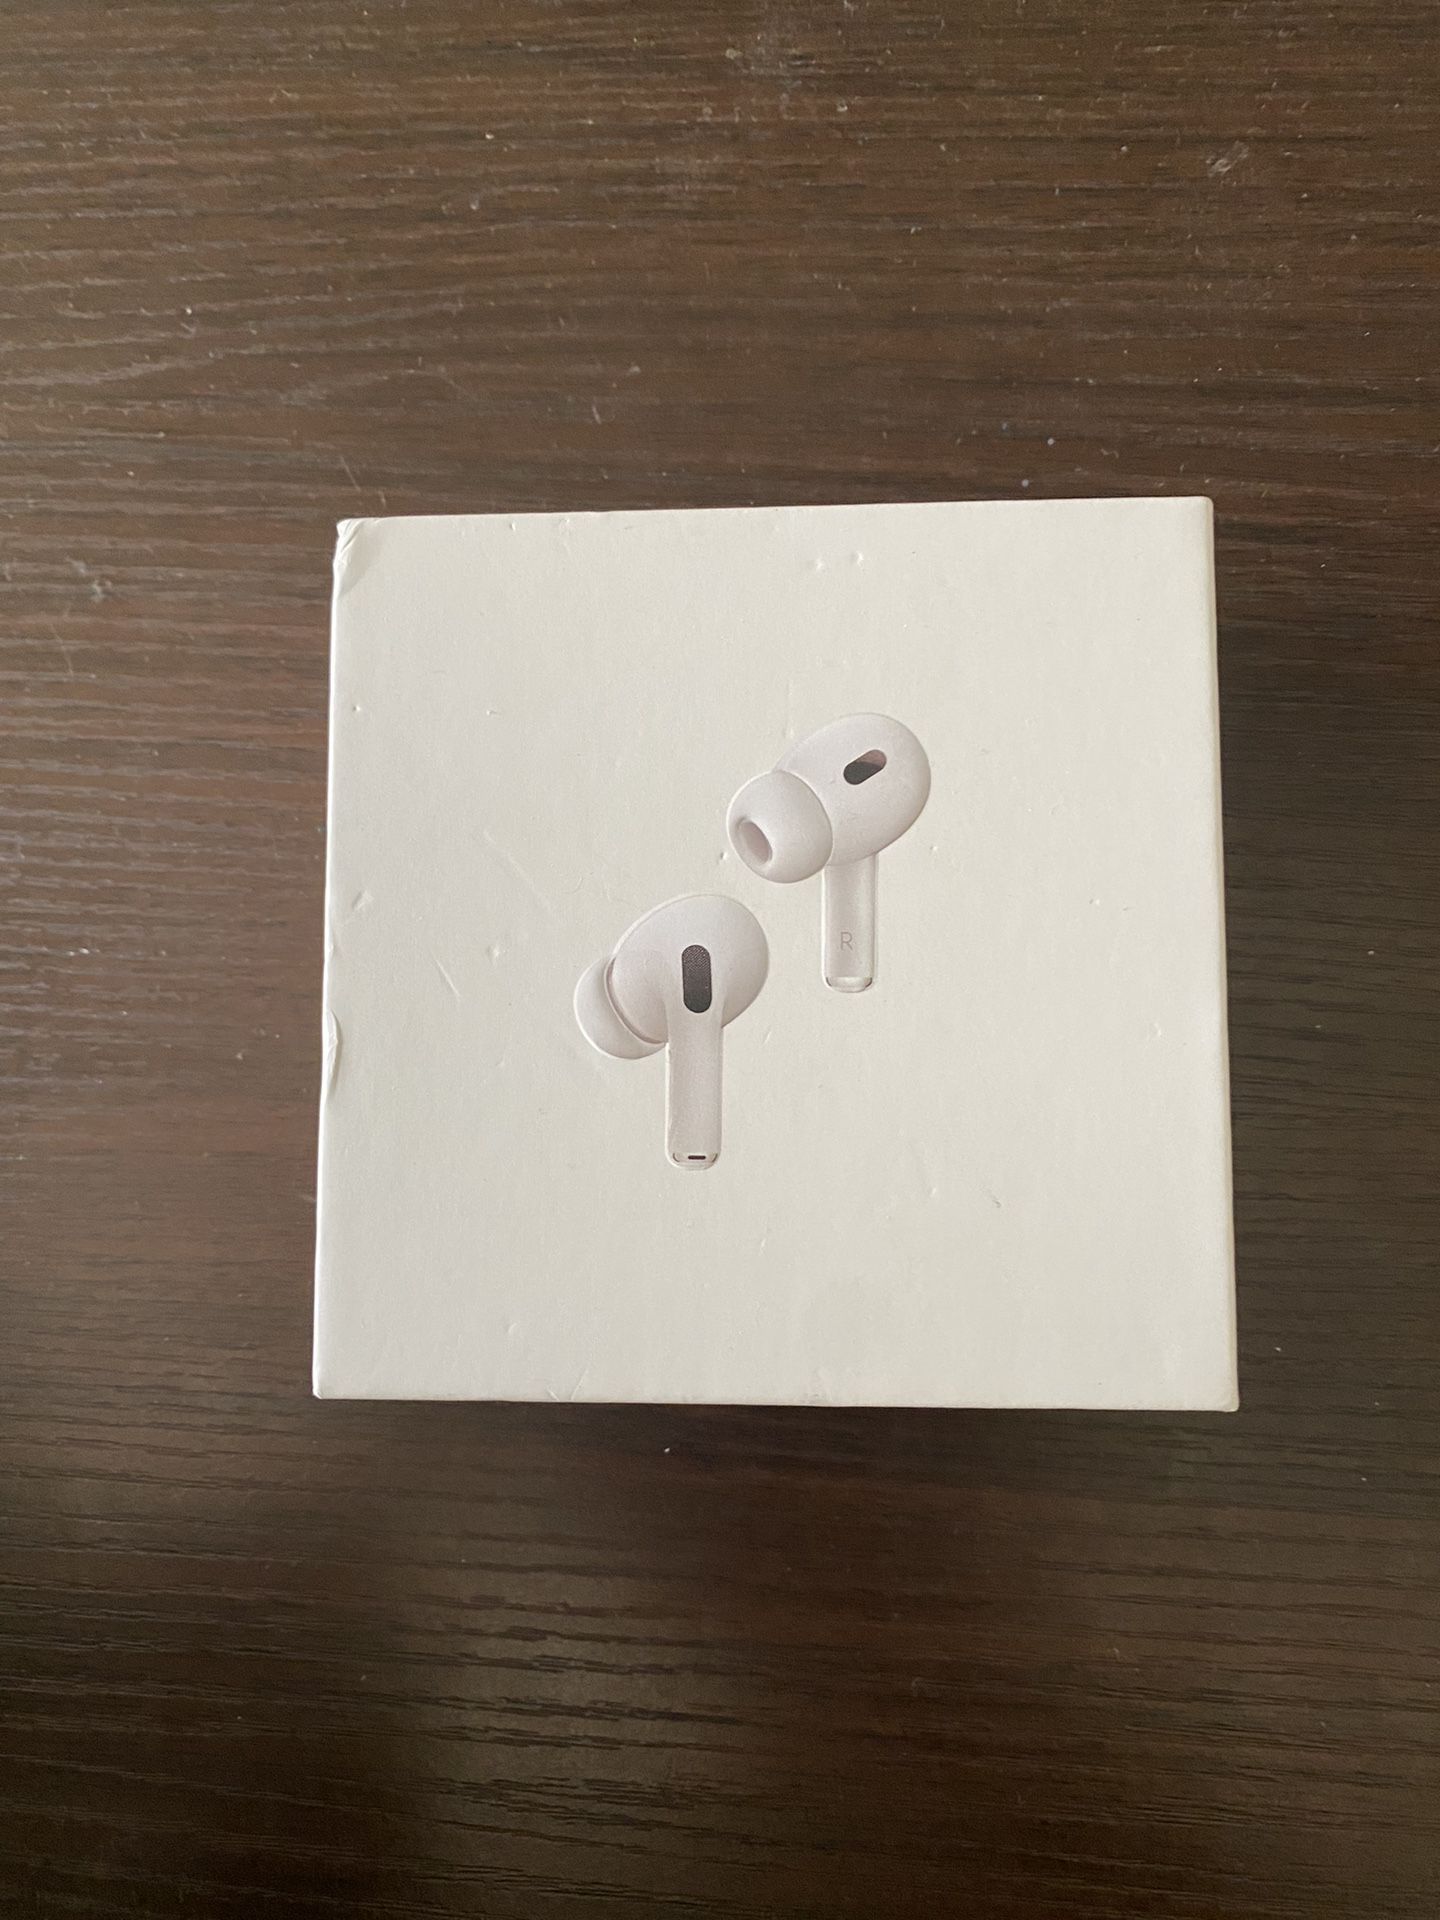 Airpods Pro (2nd Generation) Trade For Xbox 1